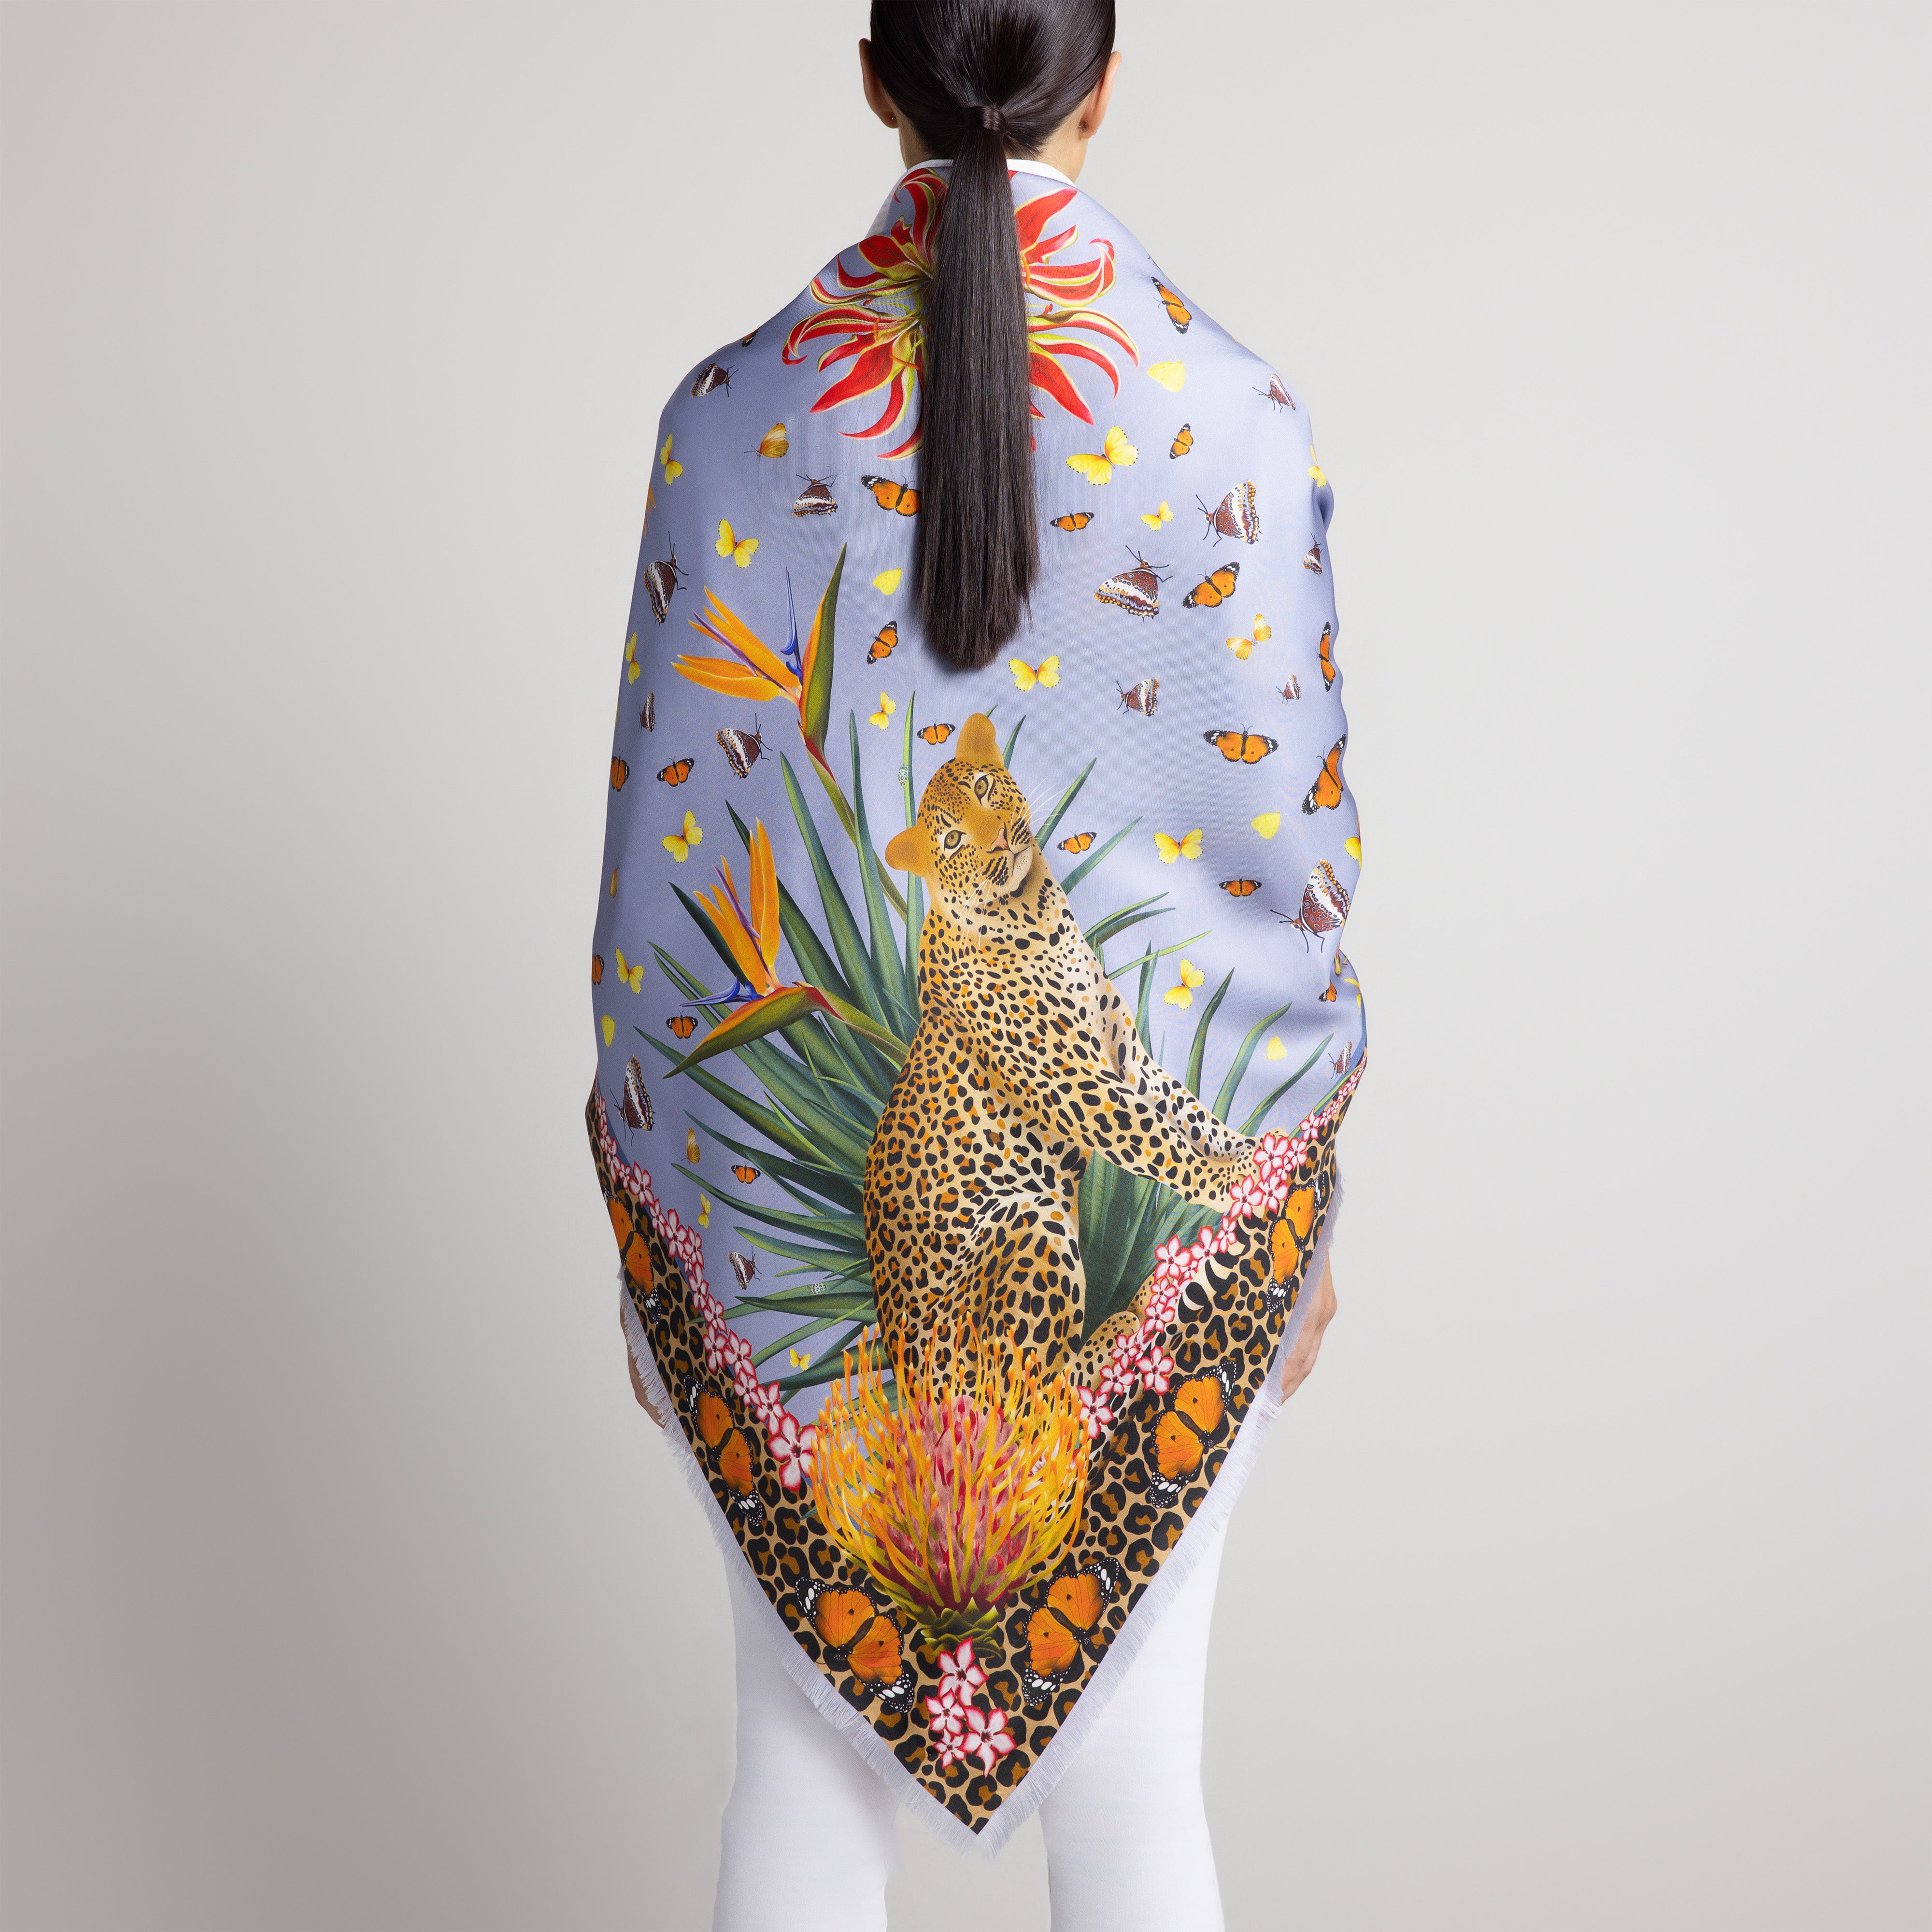 Leopard & Butterfly Grande Silk Scarf in Light Blue with Hand-Feathered Edges